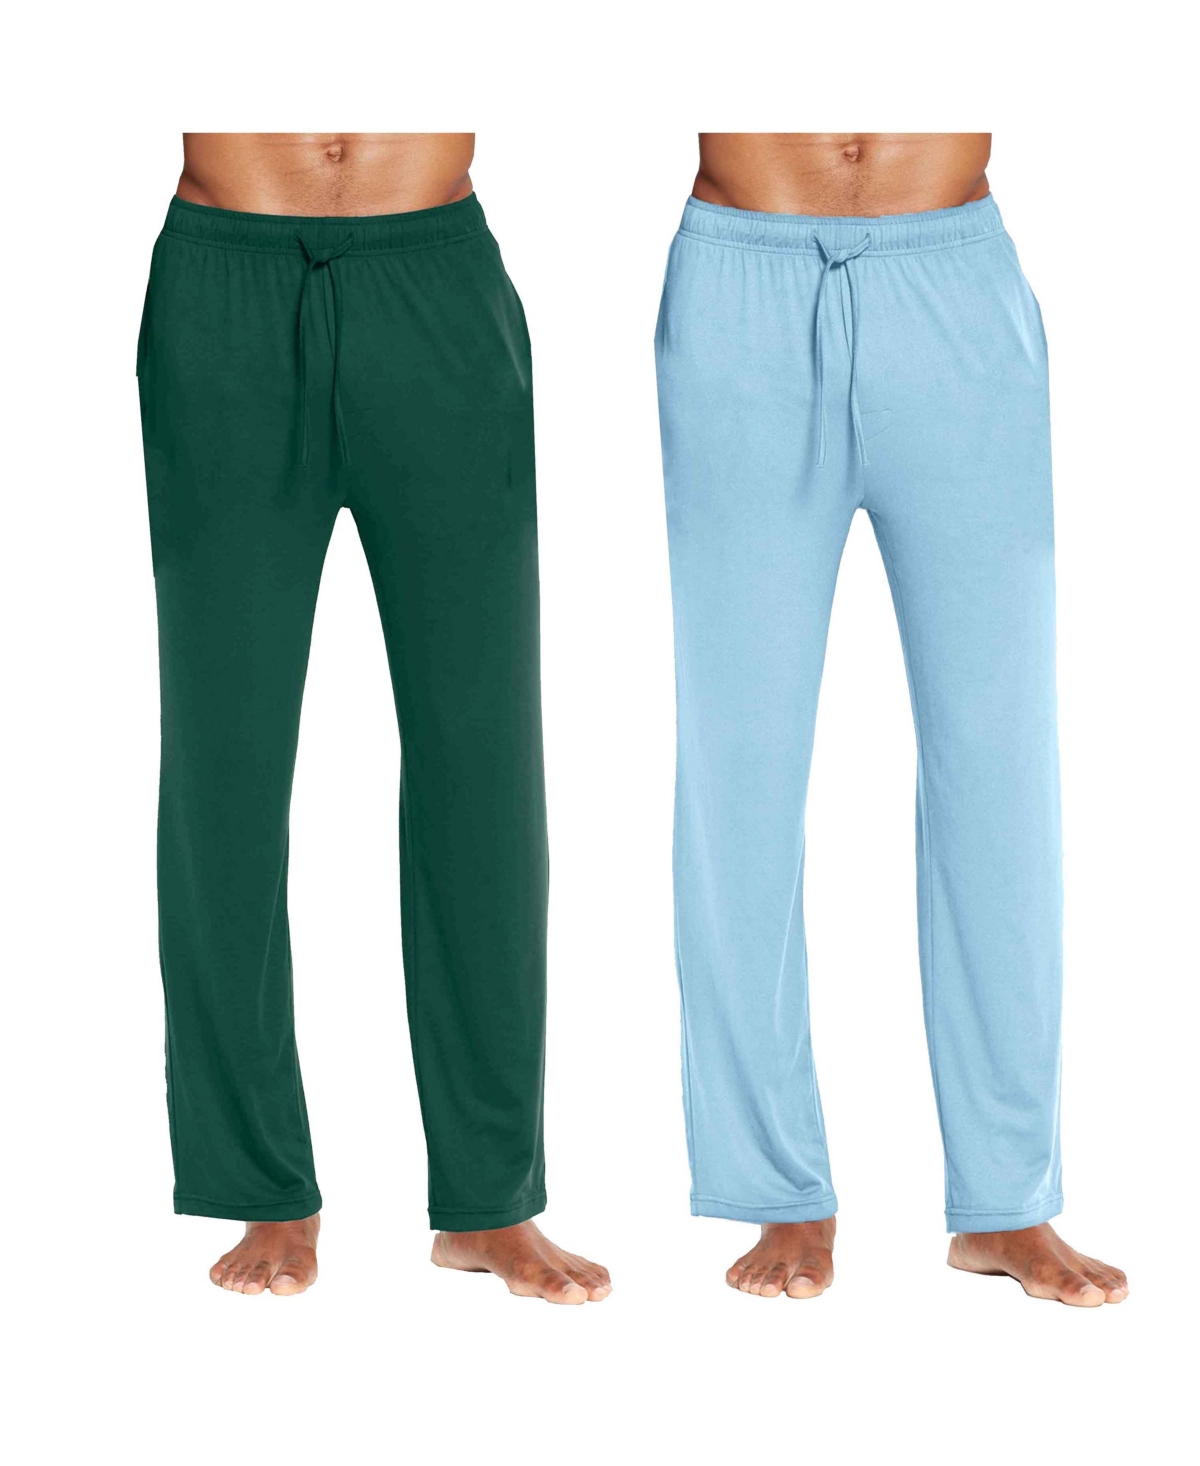 Galaxy By Harvic Men's Classic Lounge Pants, Pack of 2